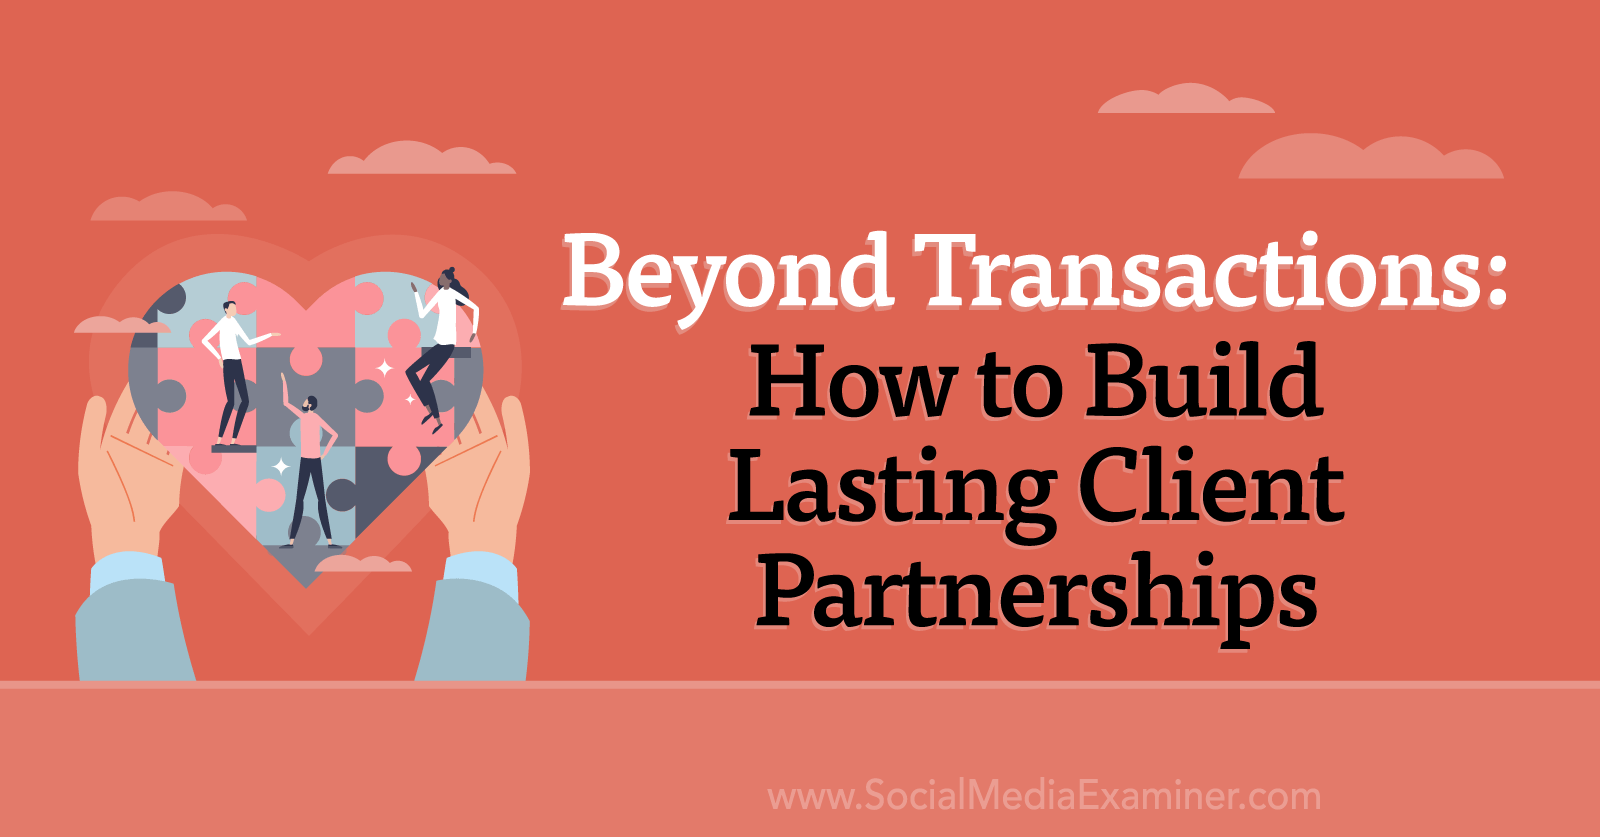 Beyond Transactions: How to Build Lasting Client Partnerships by Social Media Examiner